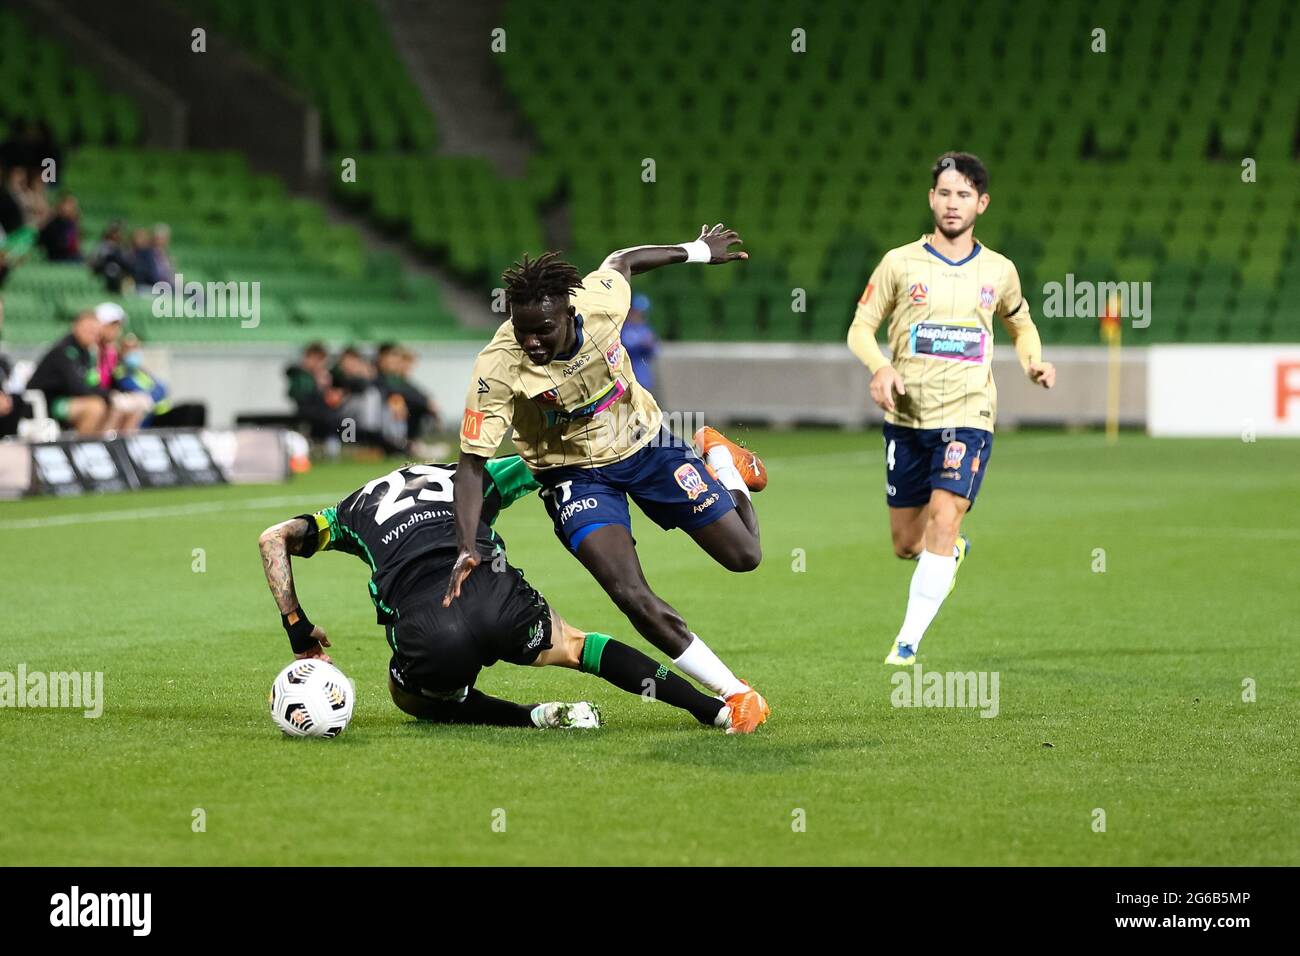 MELBOURNE, AUSTRALIA - APRIL 26: Valentino Yuel of Newcastle Jets and Alessandro Diamanti of Western United clash during the Hyundai A-League soccer match between Western United FC and Newcastle Jets on April, 26, 2021 at AAMI Park in Melbourne, Australia. (Photo by Dave Hewison) Stock Photo